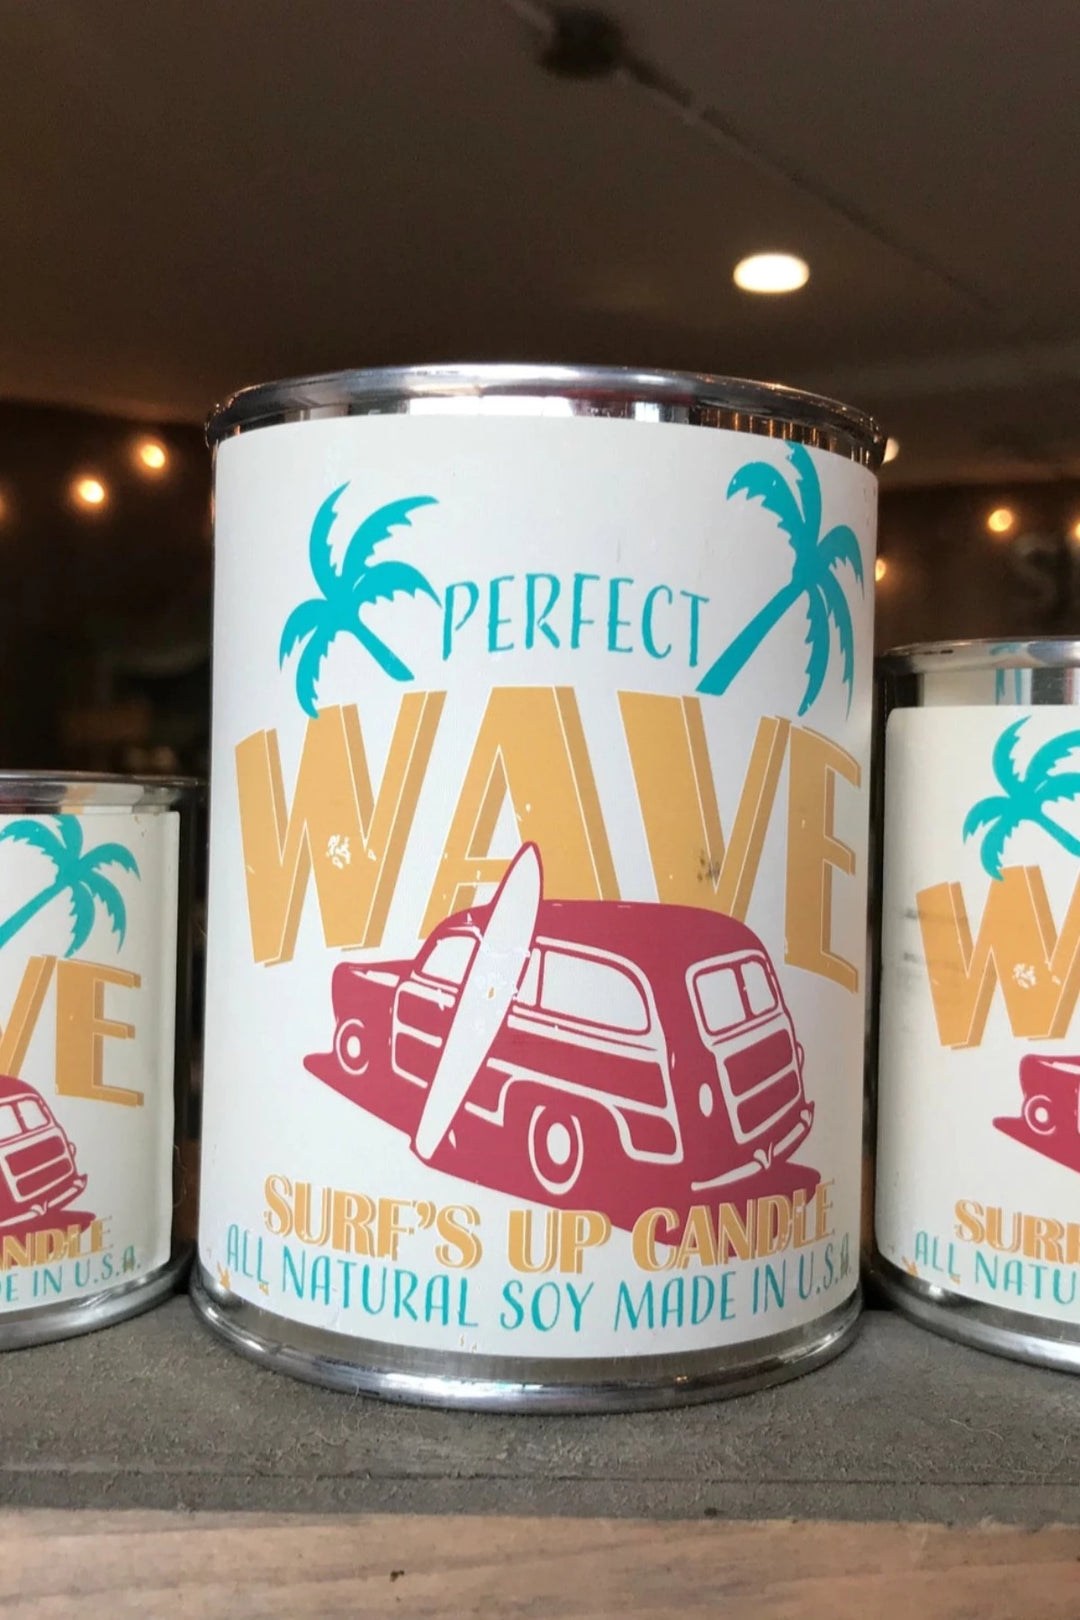 SURFS UP CANDLE - PAINT CAN CANDLE 8 OZ - PERFECT WAVE